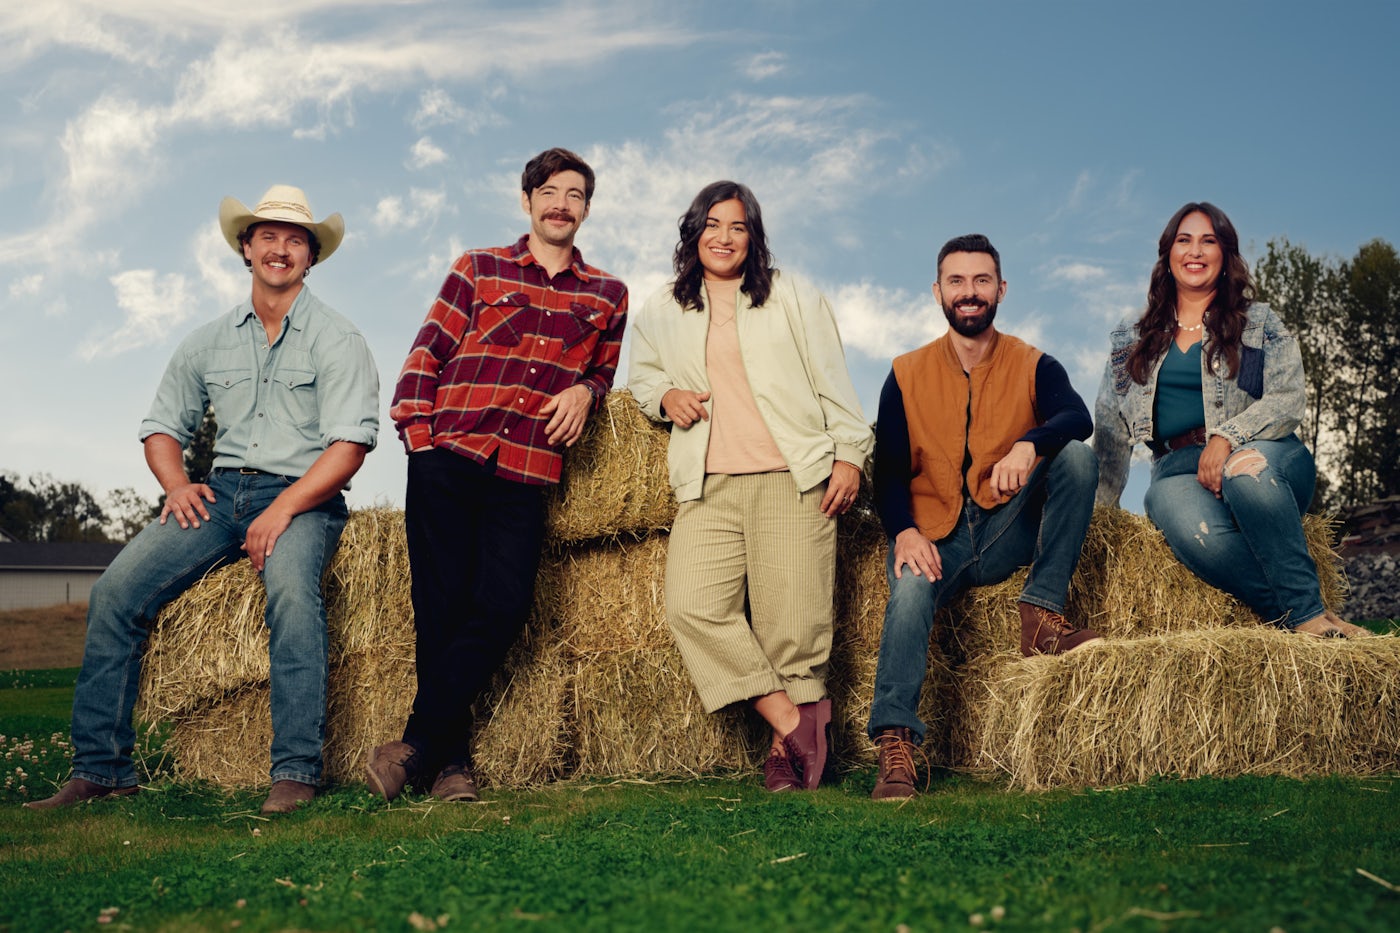 Image for the Seeds Are Sown as Season 2 of CTV Original Series FARMING FOR LOVE Premieres May 29 press release